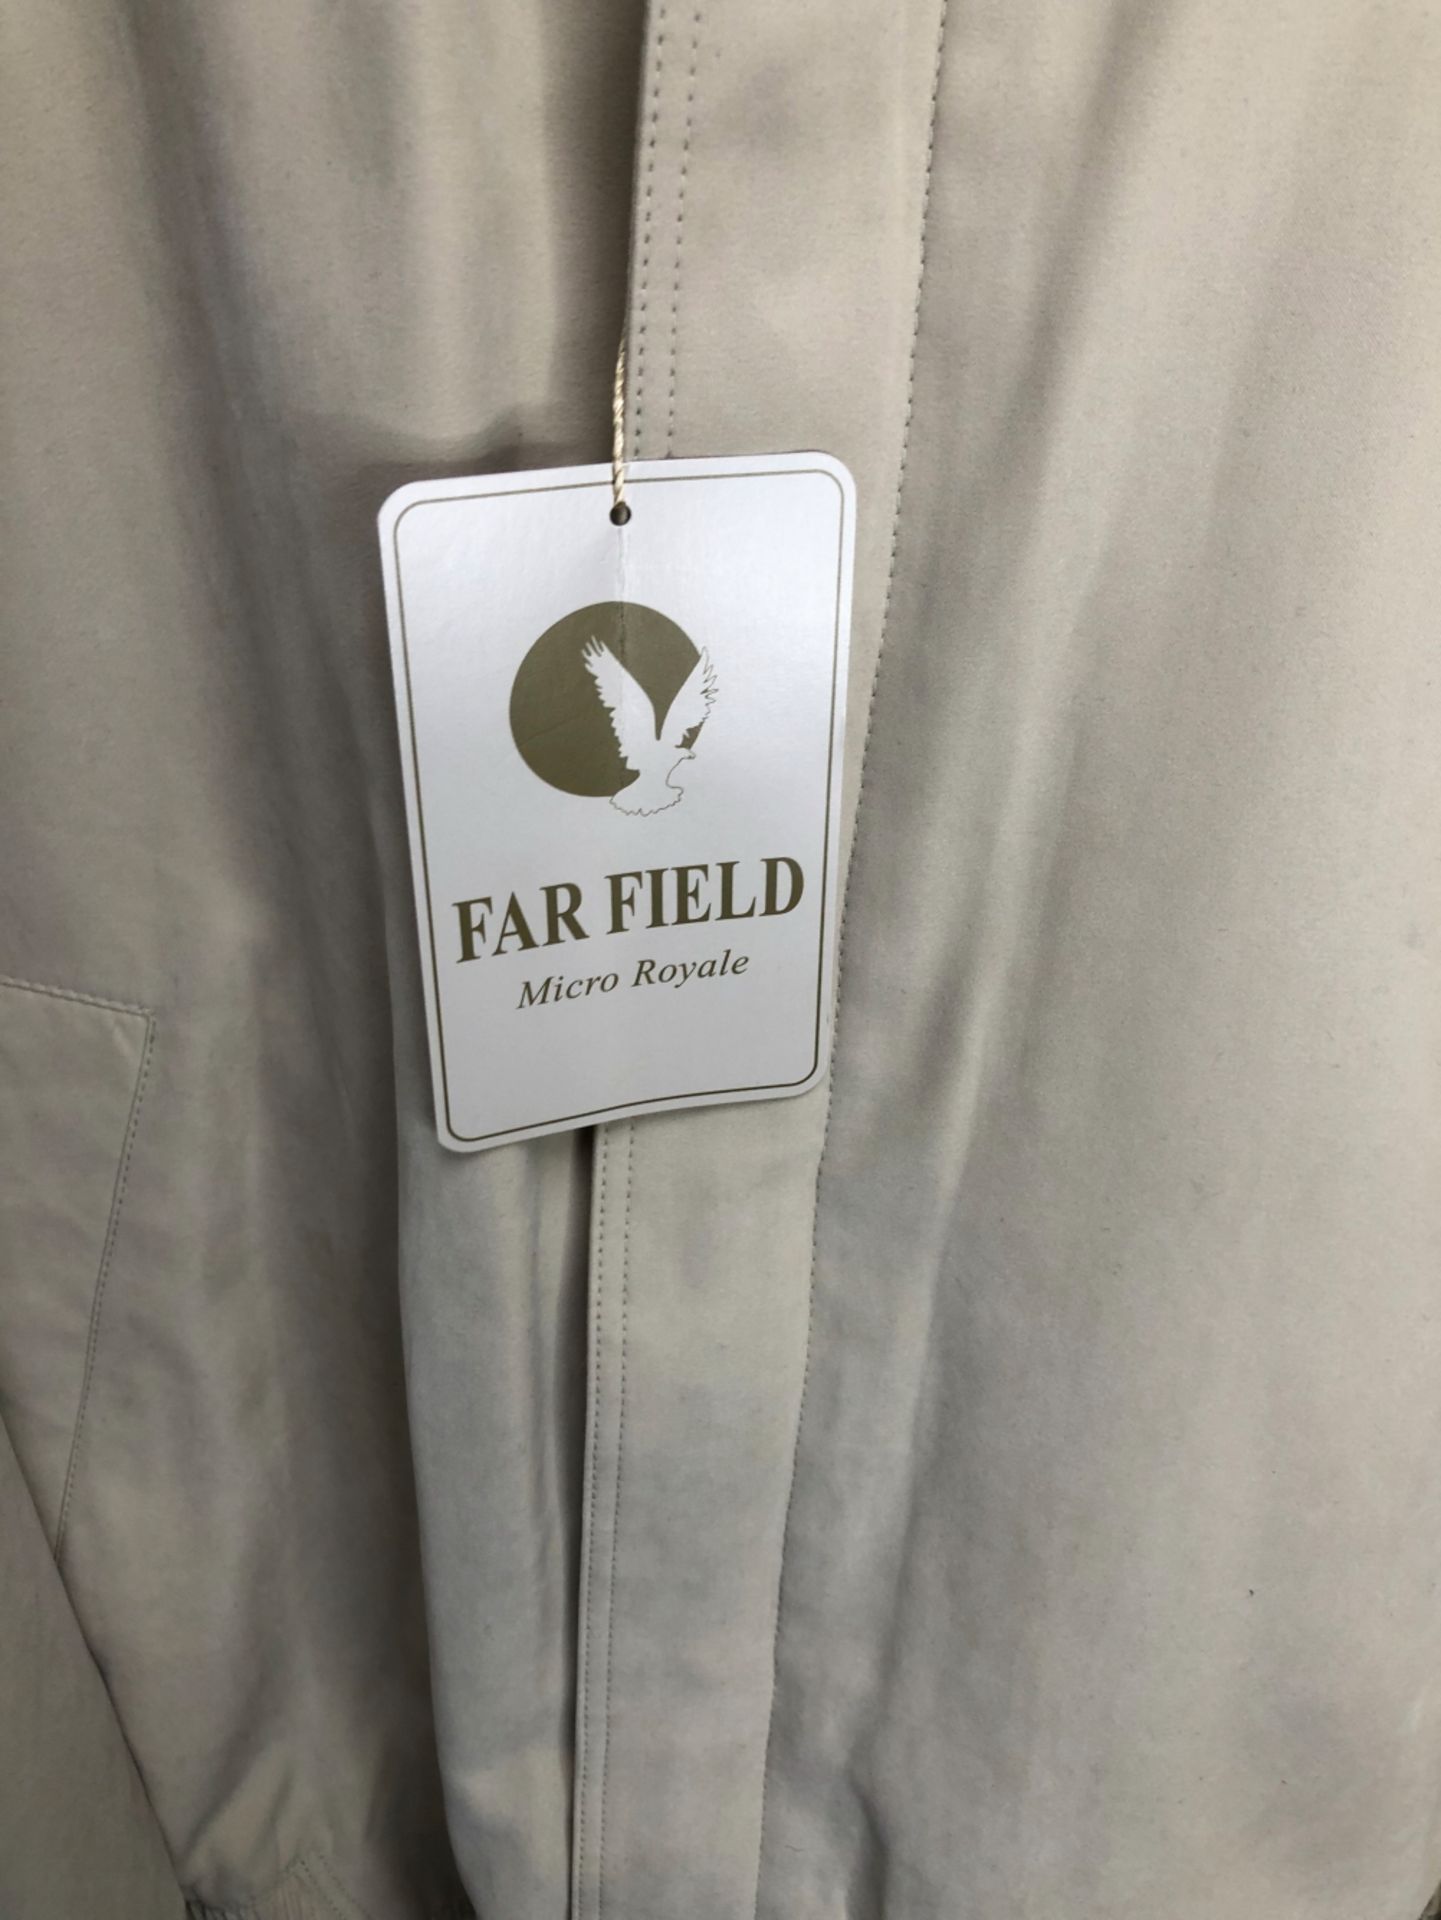 JACKET: KEMPEL SPORTSWEAR, GREY QUILTED, SIZE 44 TOGETHER WITH JACKET: FARFIELD MICRO ROYALE, CREAM, - Image 4 of 9